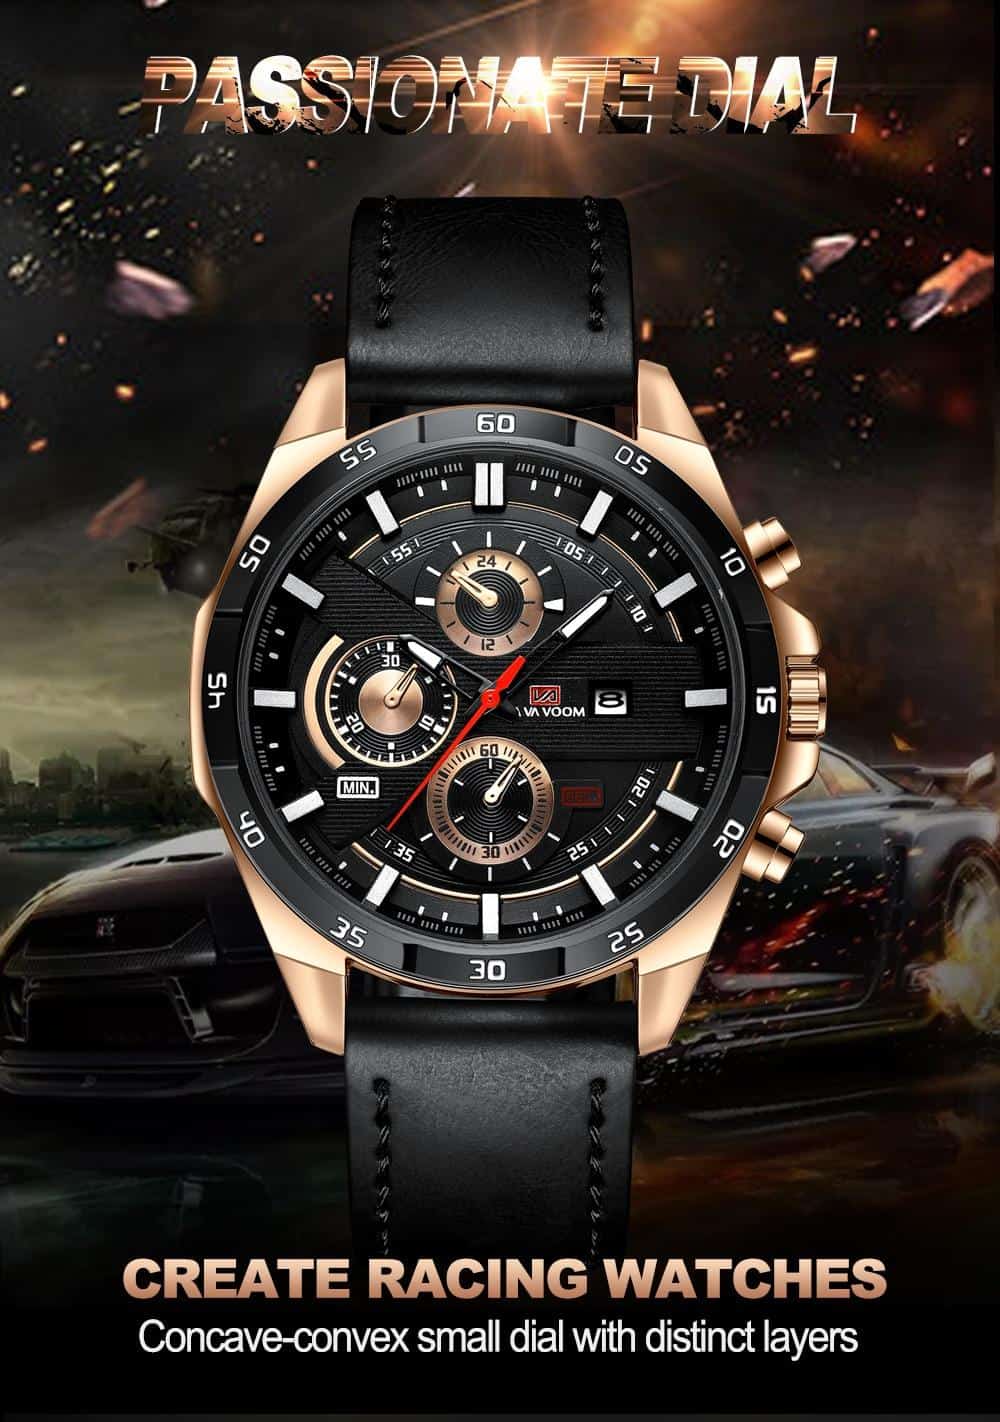 2021 New Arrival Moderno Watches Mens Sport Reloj Hombre Casual Relogio Masculino Para Military Army Leather Wrist Watch For Men